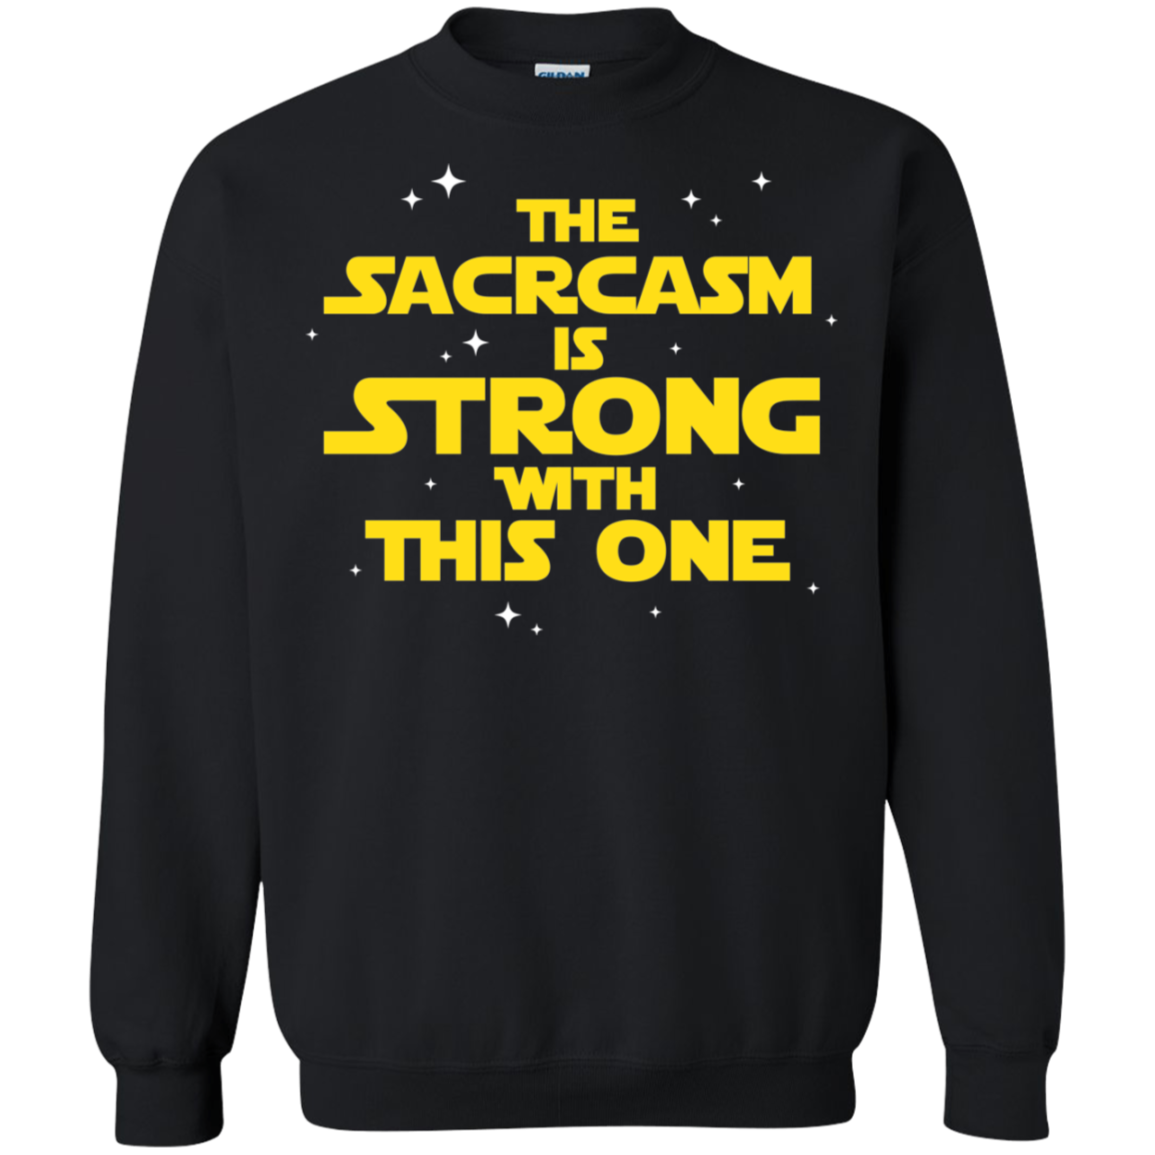 The Sarcasm Is Strong With This One Crewneck Pullover Sweatshirt  8 oz.